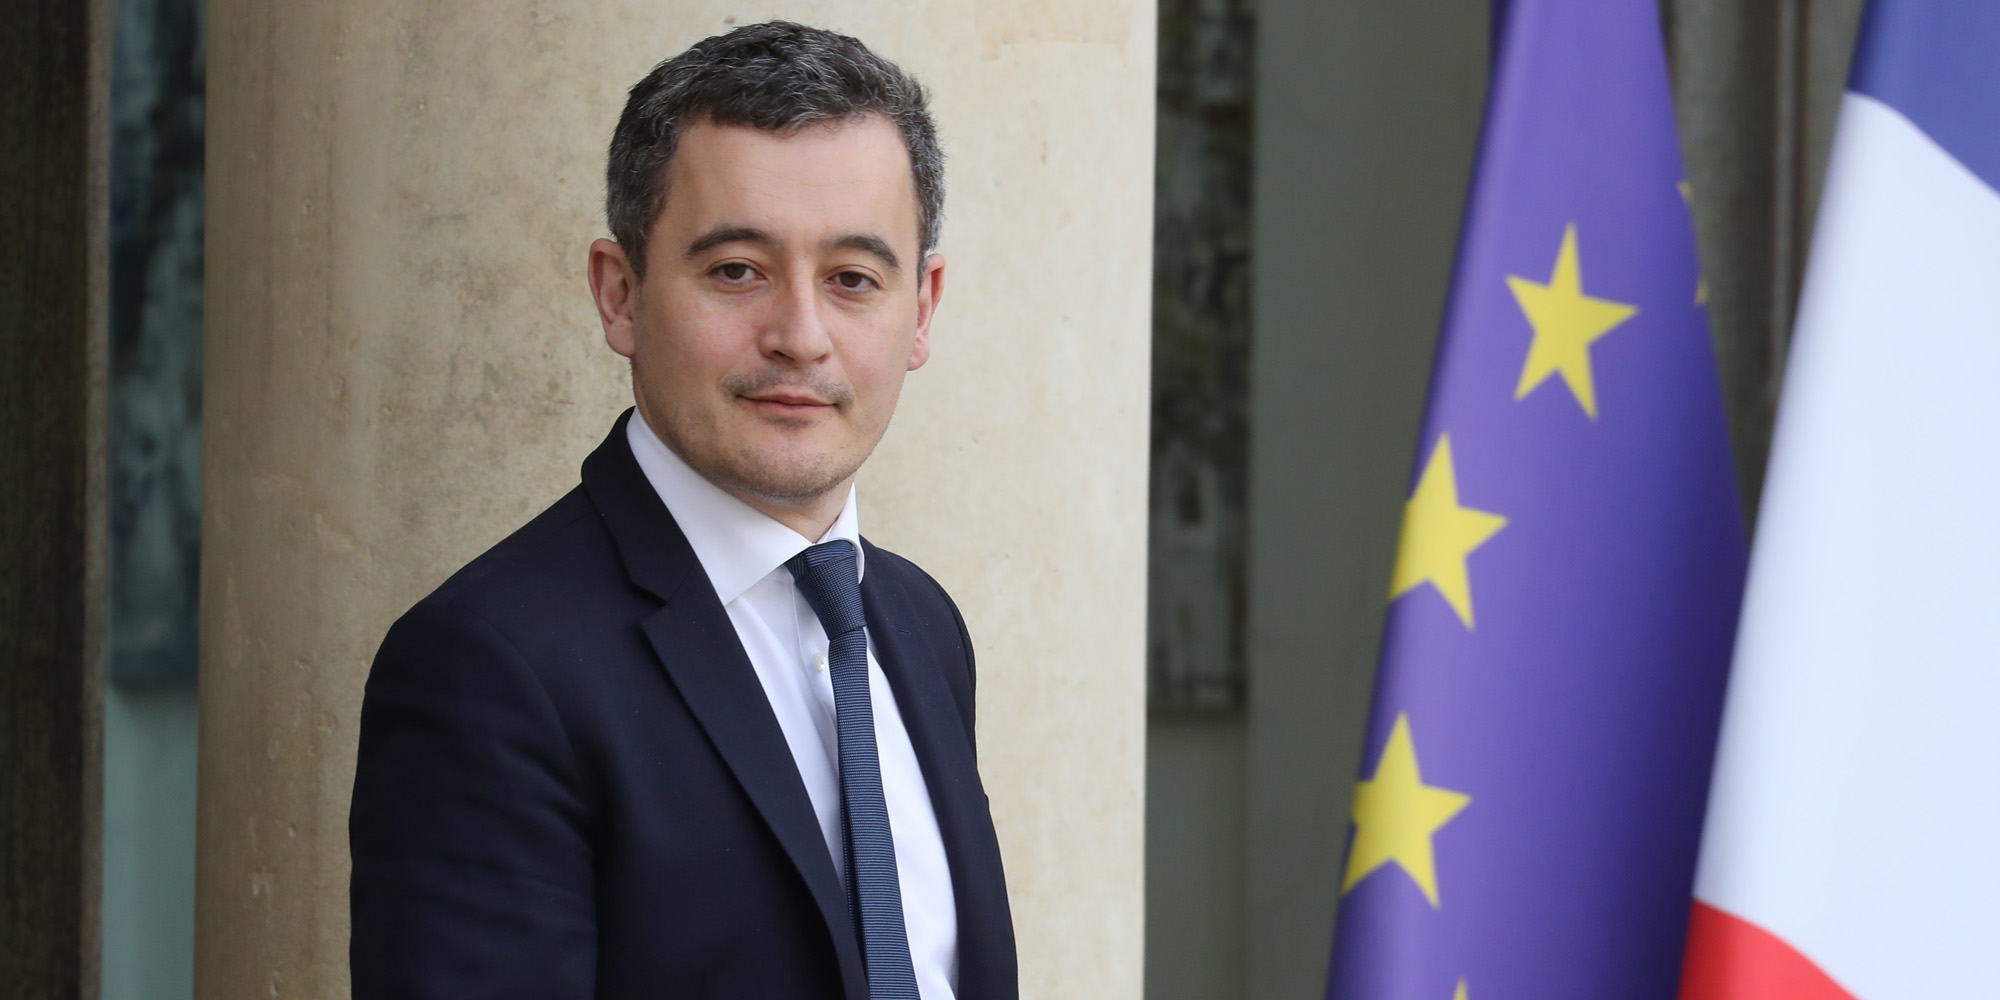 Minister of the Interior (France) Gerald Darmanin